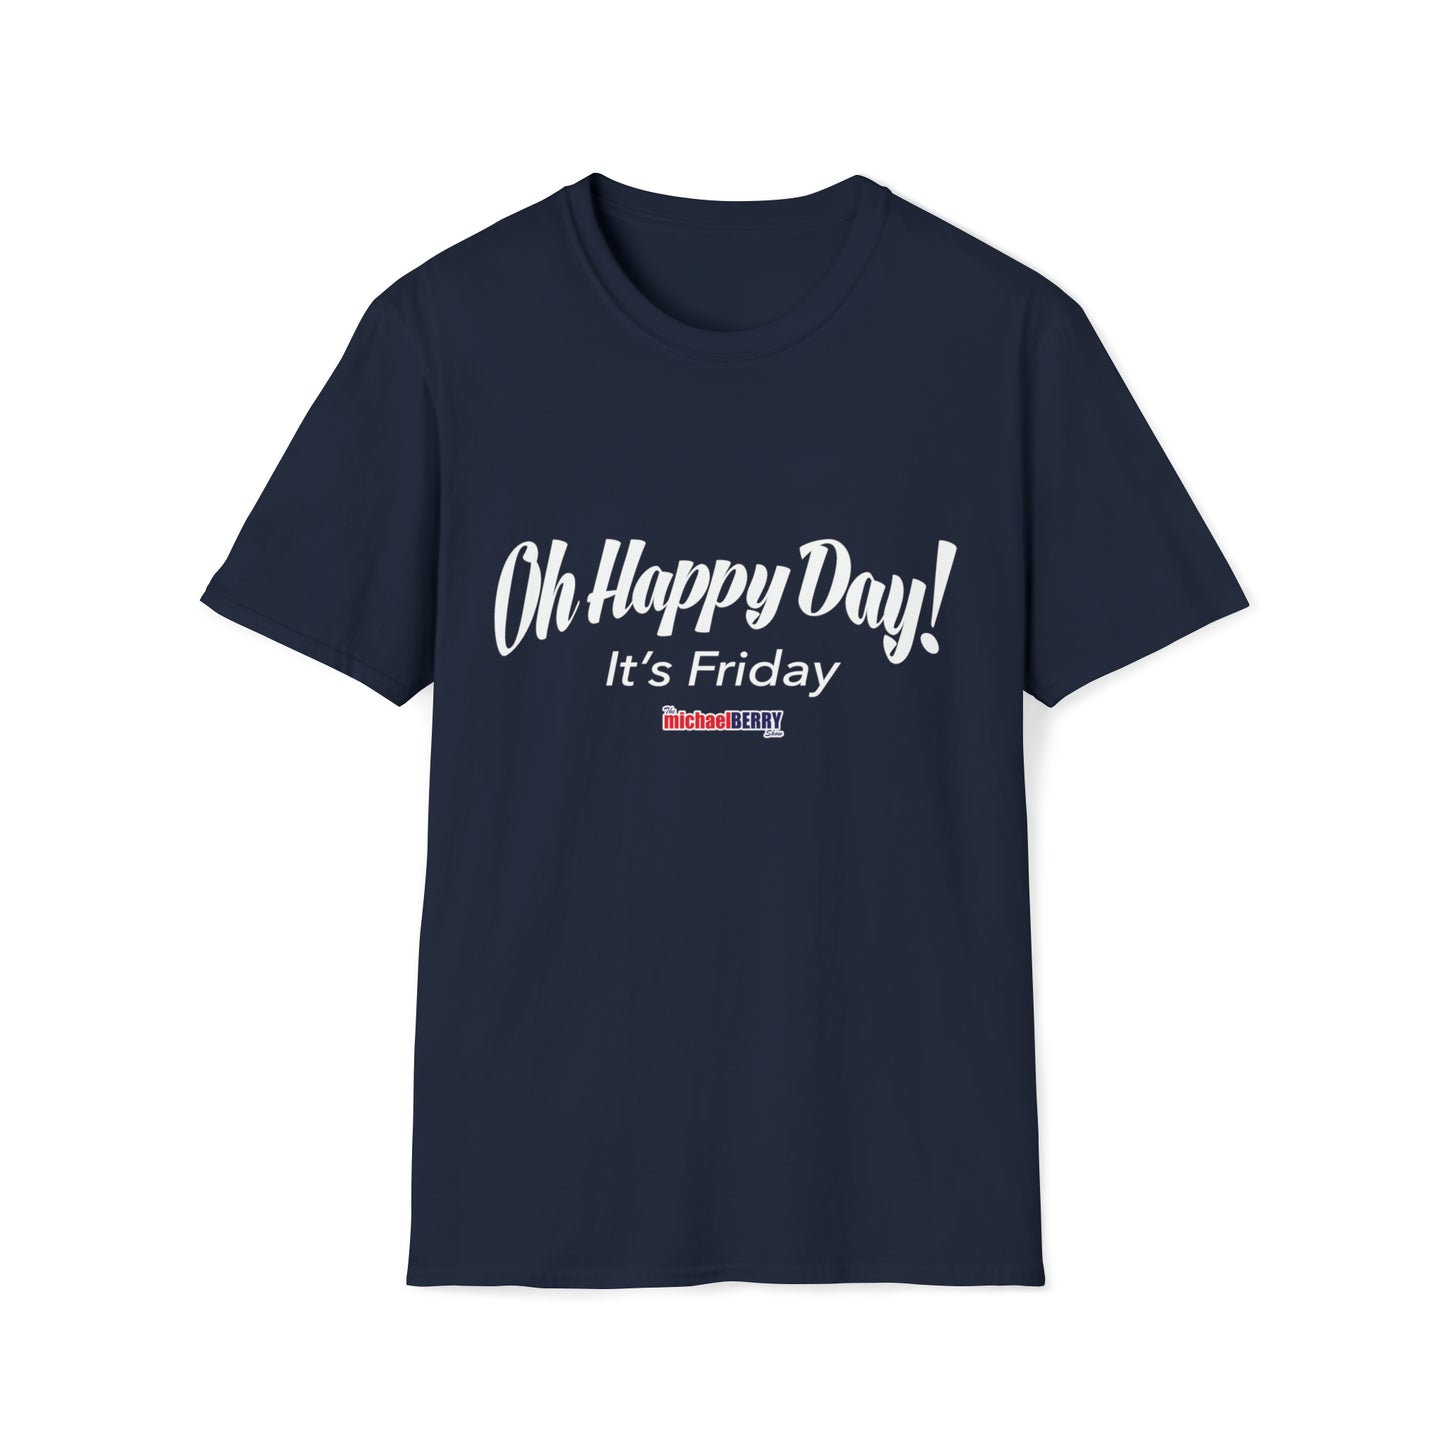 Oh Happy Day! It’s Friday - T-Shirt